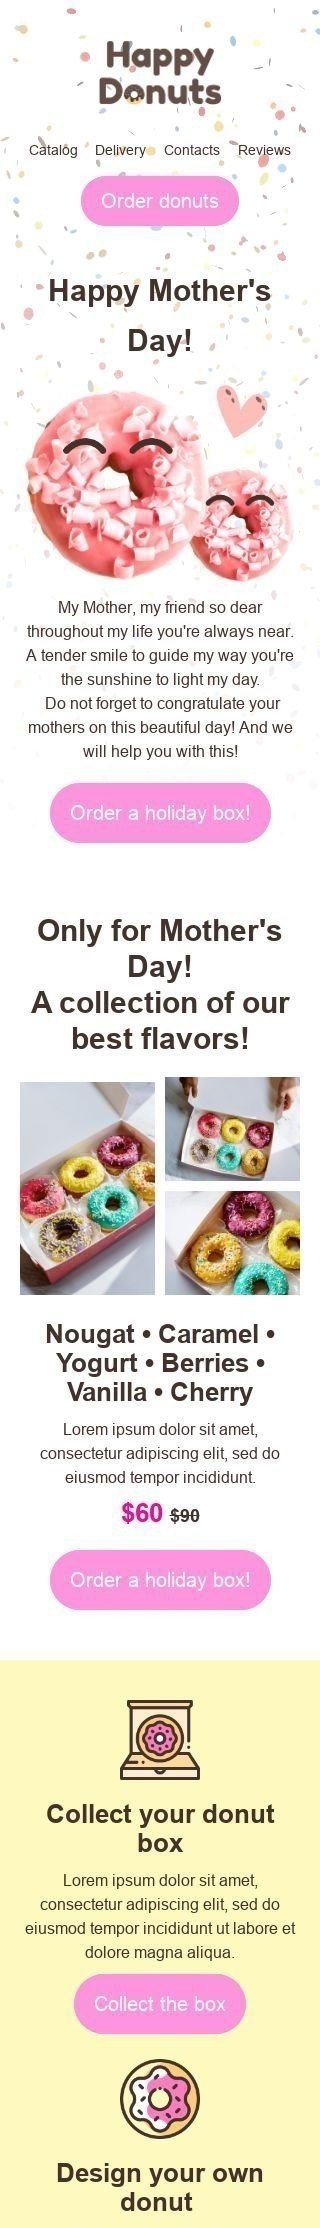 Mother’s Day Email Template «The best flavors» for Food industry mobile view